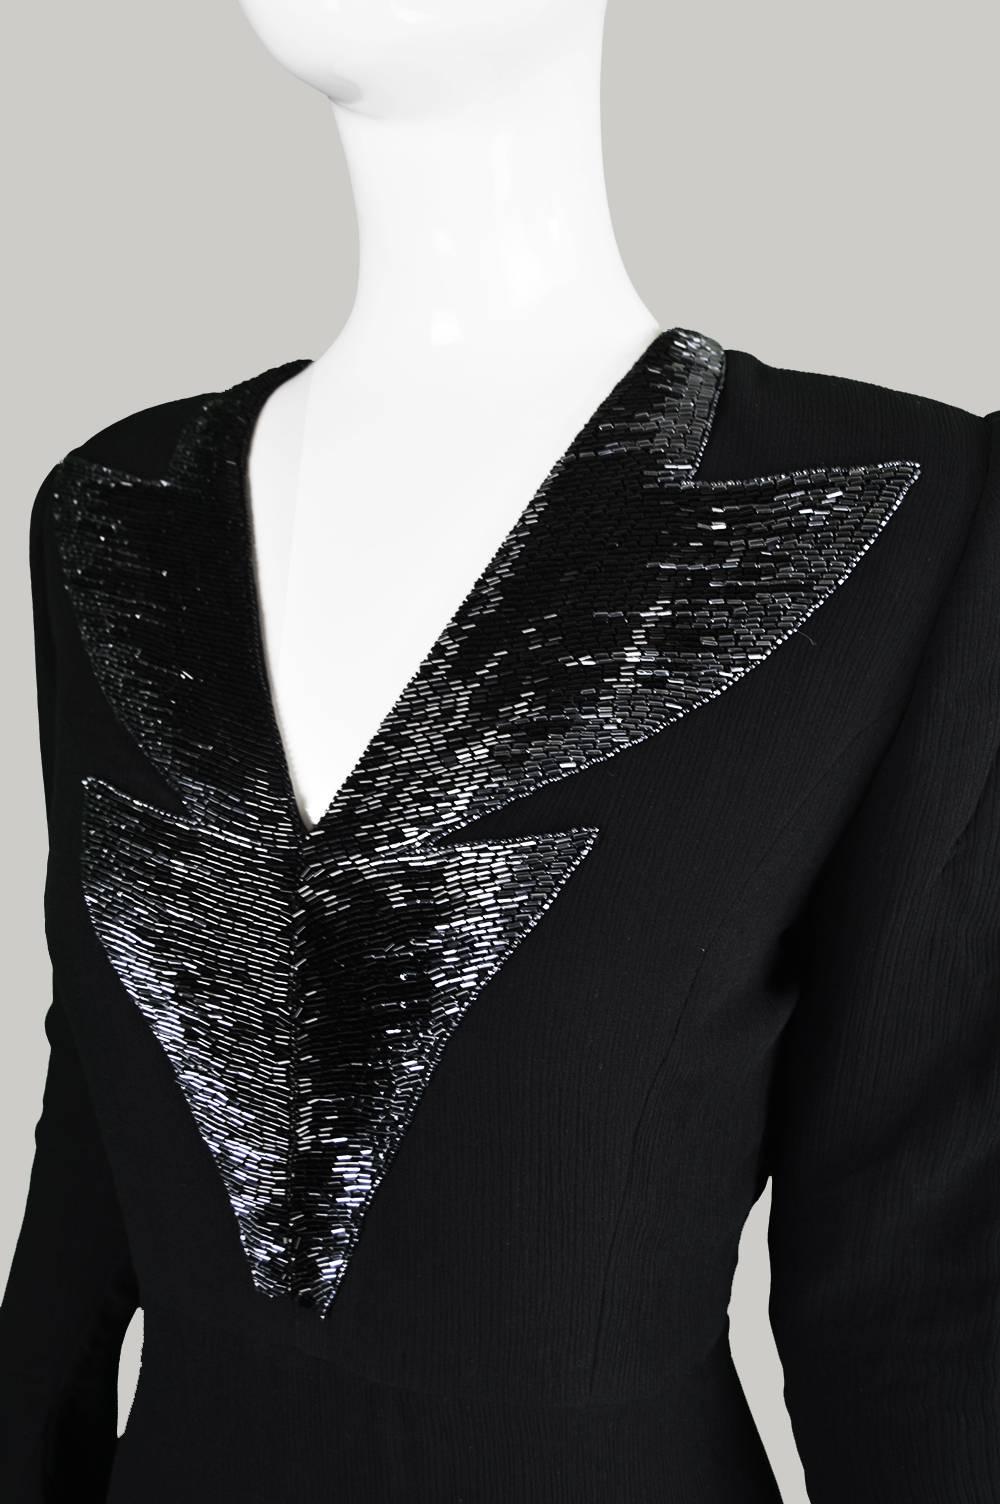 Women's Renato Balestra Double Layered Silk Beaded Black Cocktail Dress, 1980s For Sale